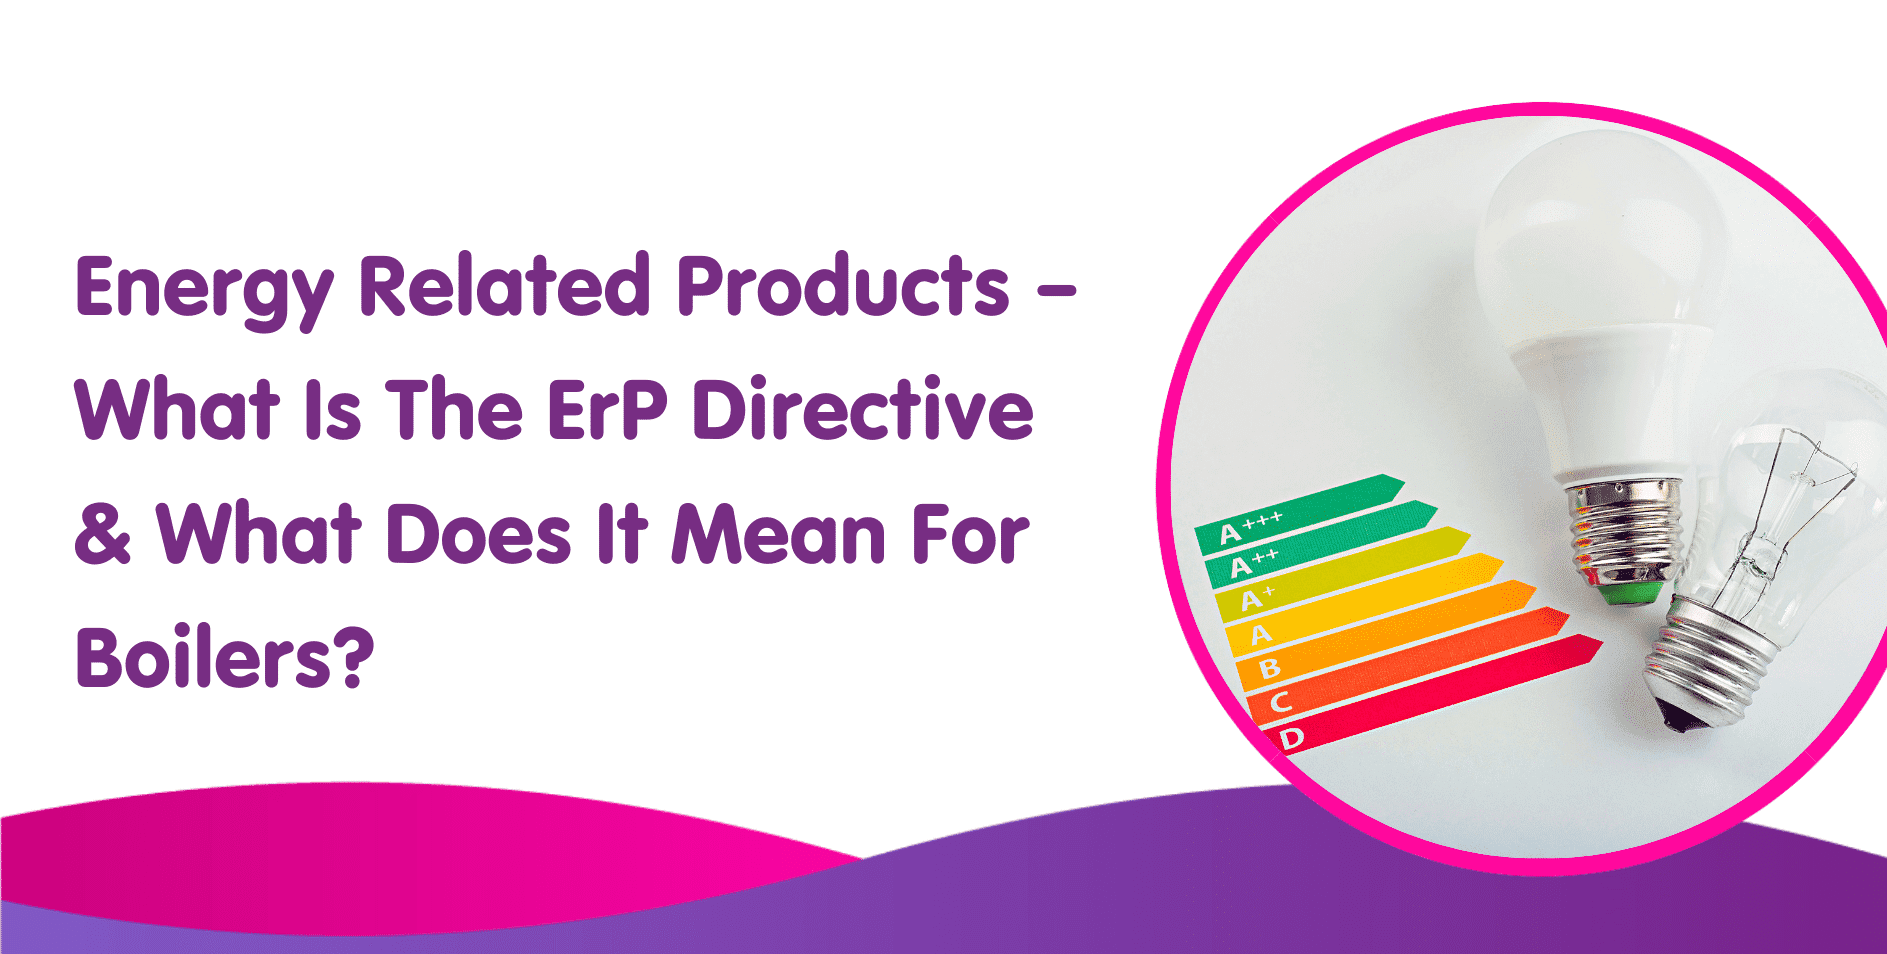 Energy Related Products – What Is The ErP Directive & What Does It Mean For Boilers